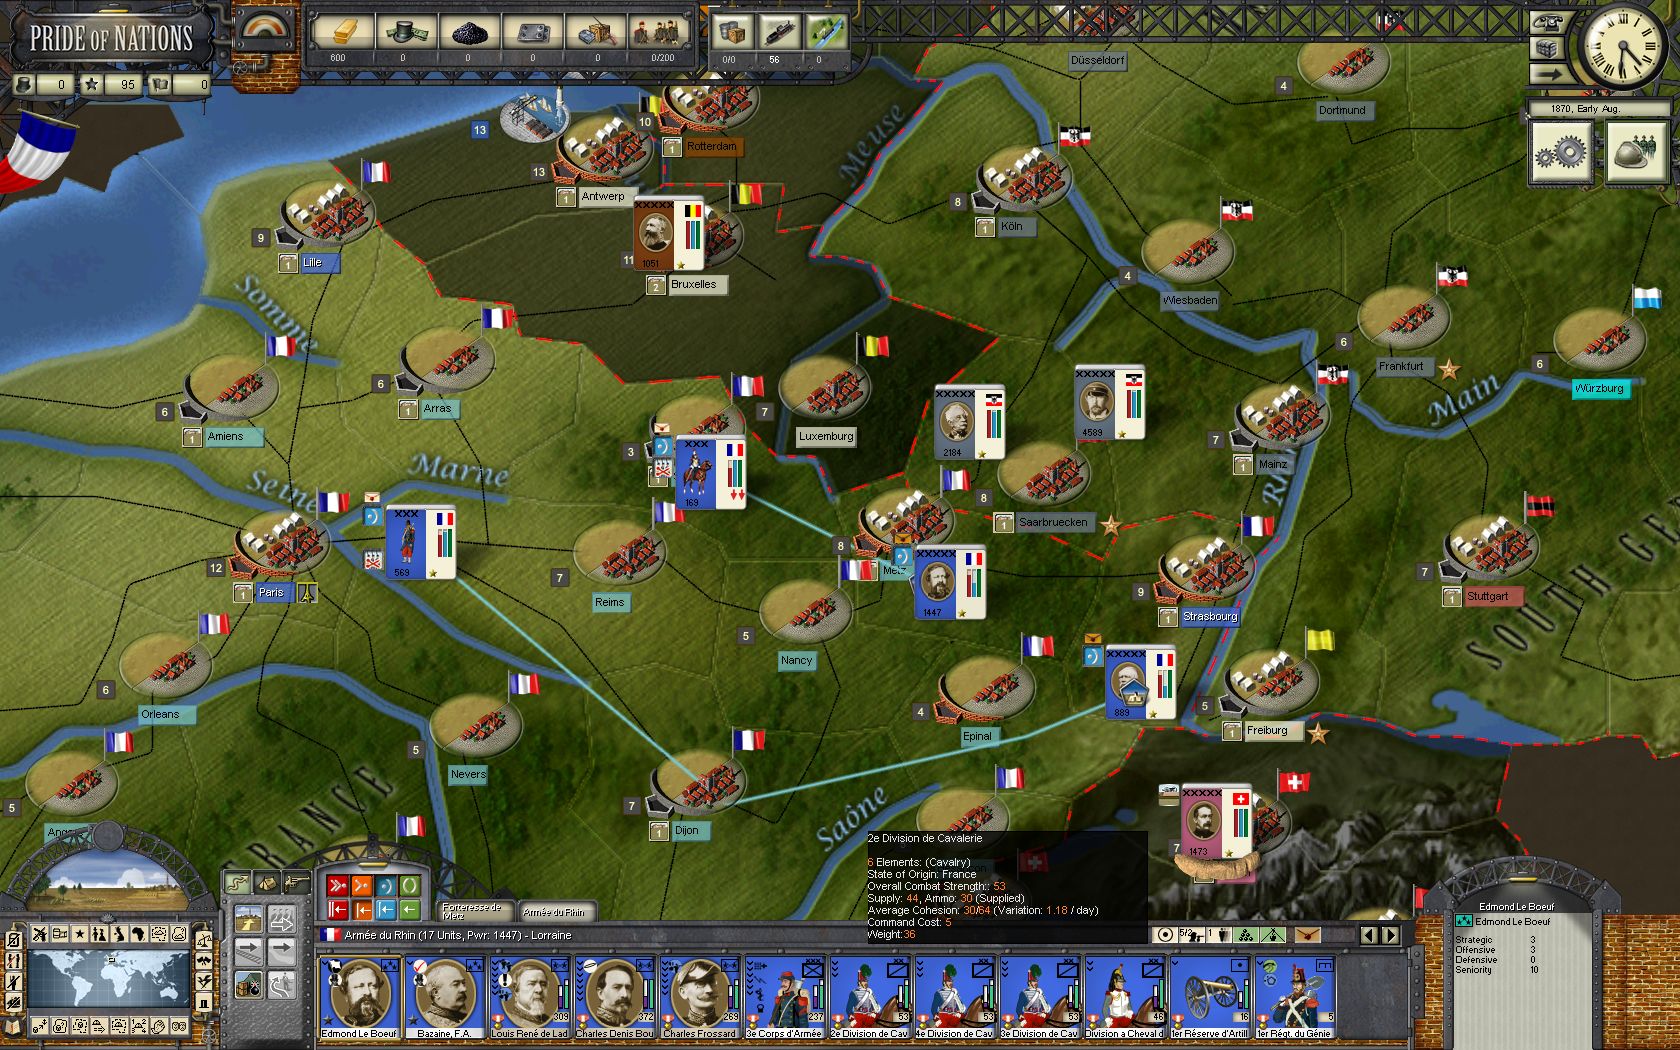 Pride of Nations - The Franco-Prussian War 1870 DLC Steam CD Key 4.38 $